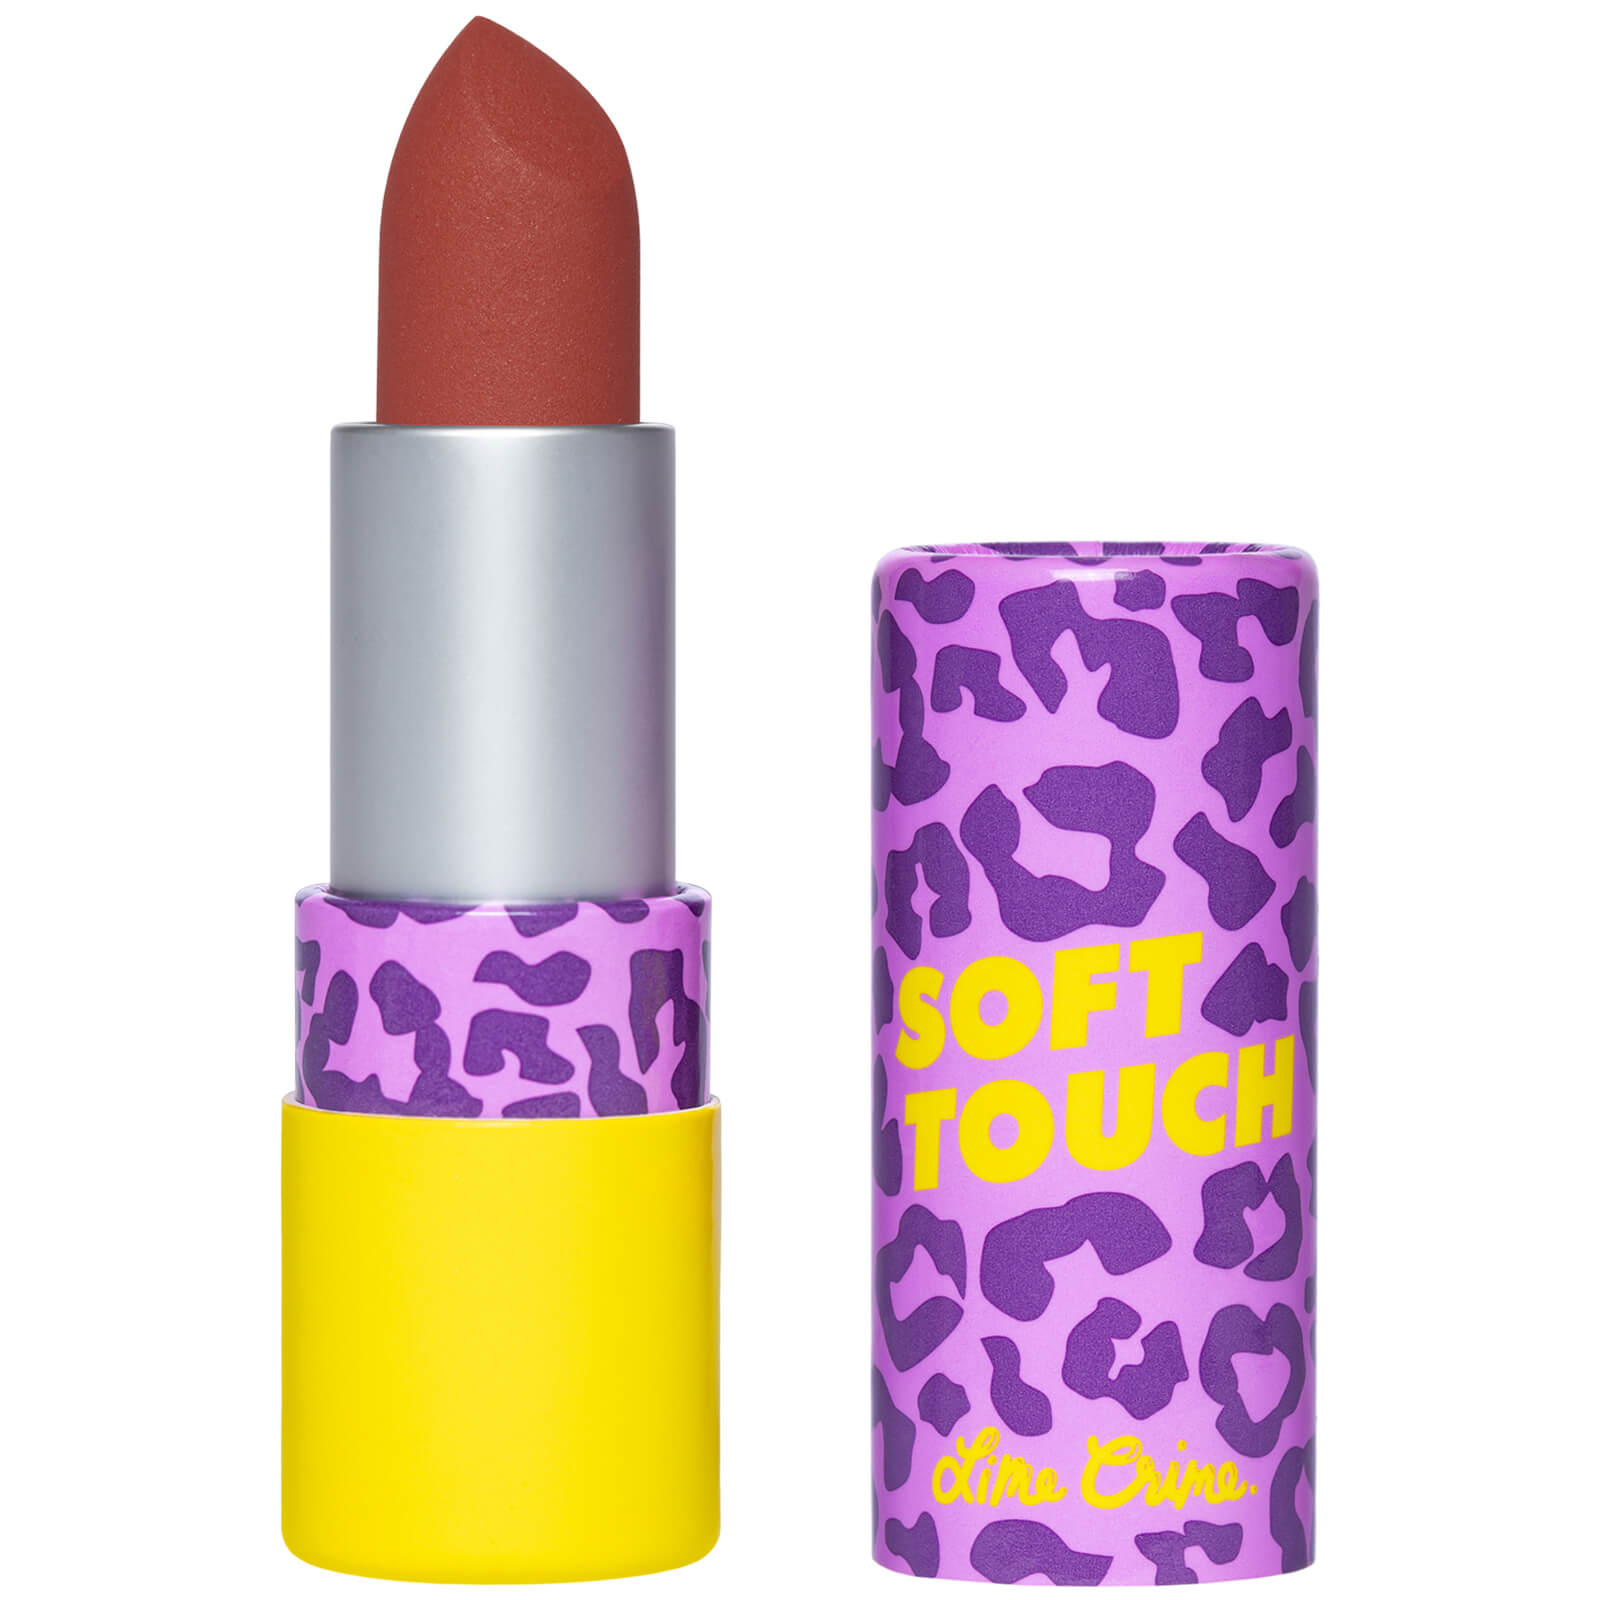 Lime Crime Soft Touch Lipstick 4.4g (Various Shades) - Vintage Spice